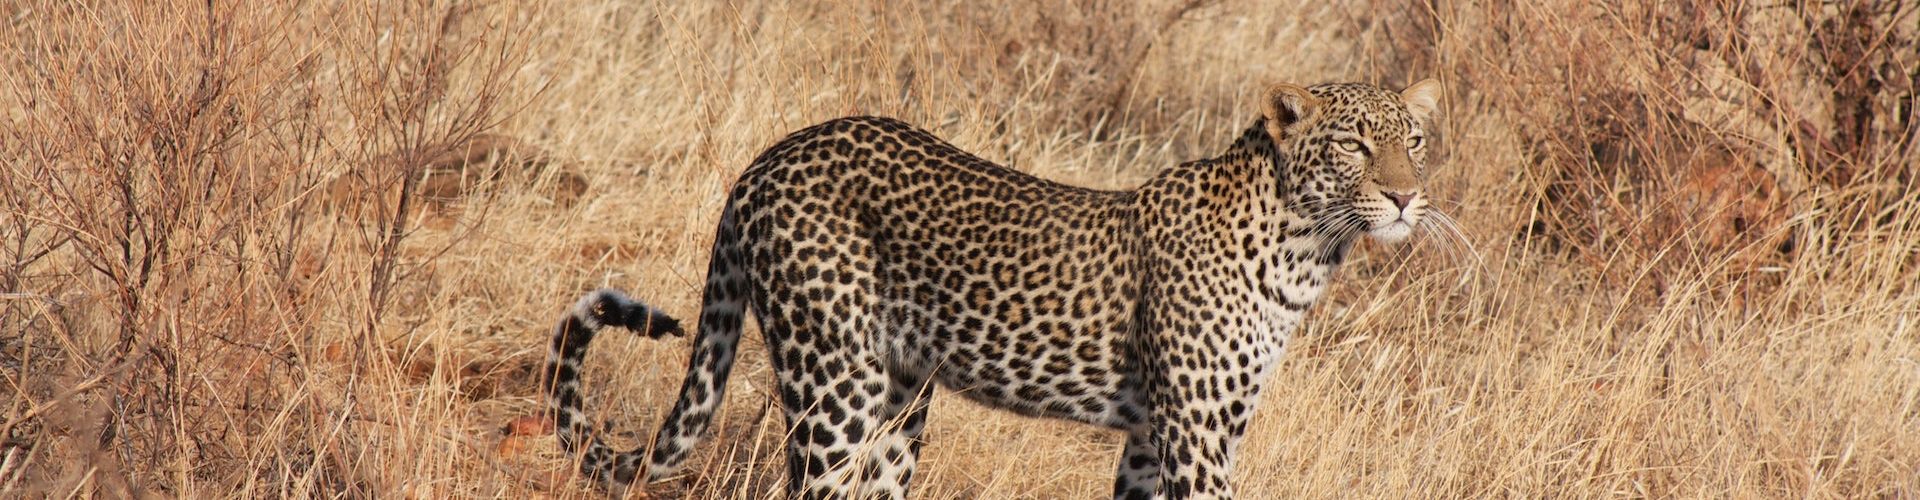 A leopard in the Ikoma Wildlife Management Area